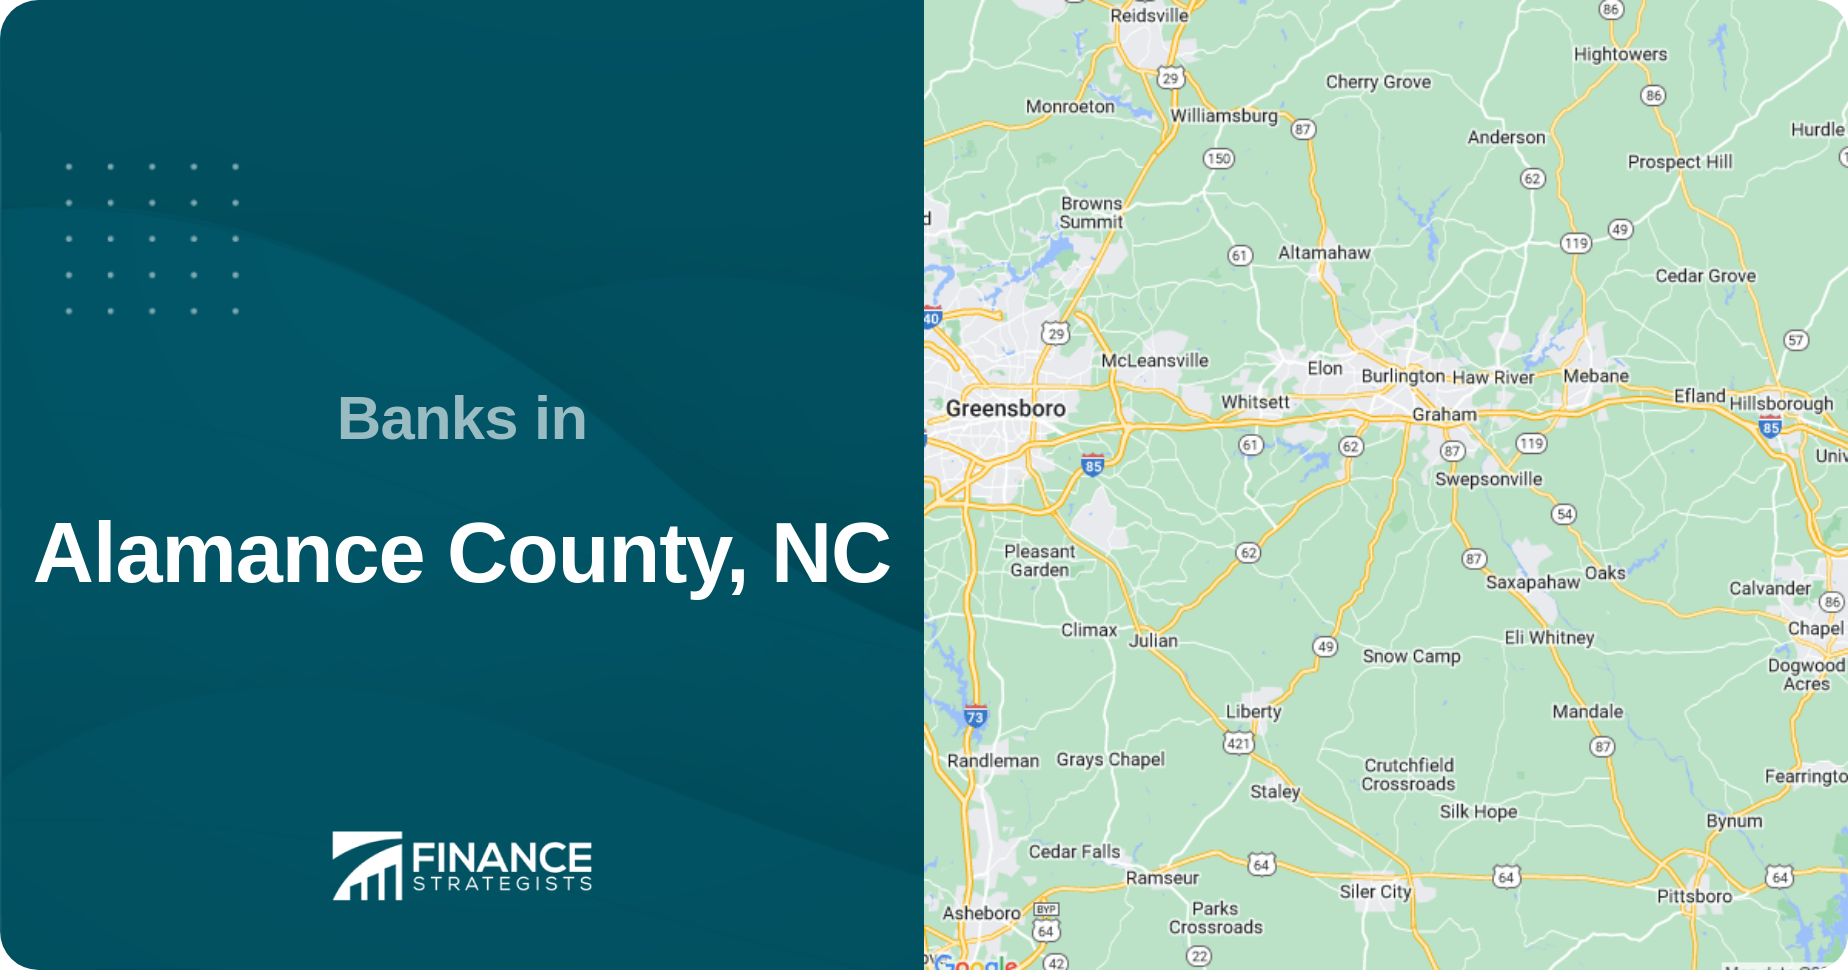 Banks in Alamance County, NC